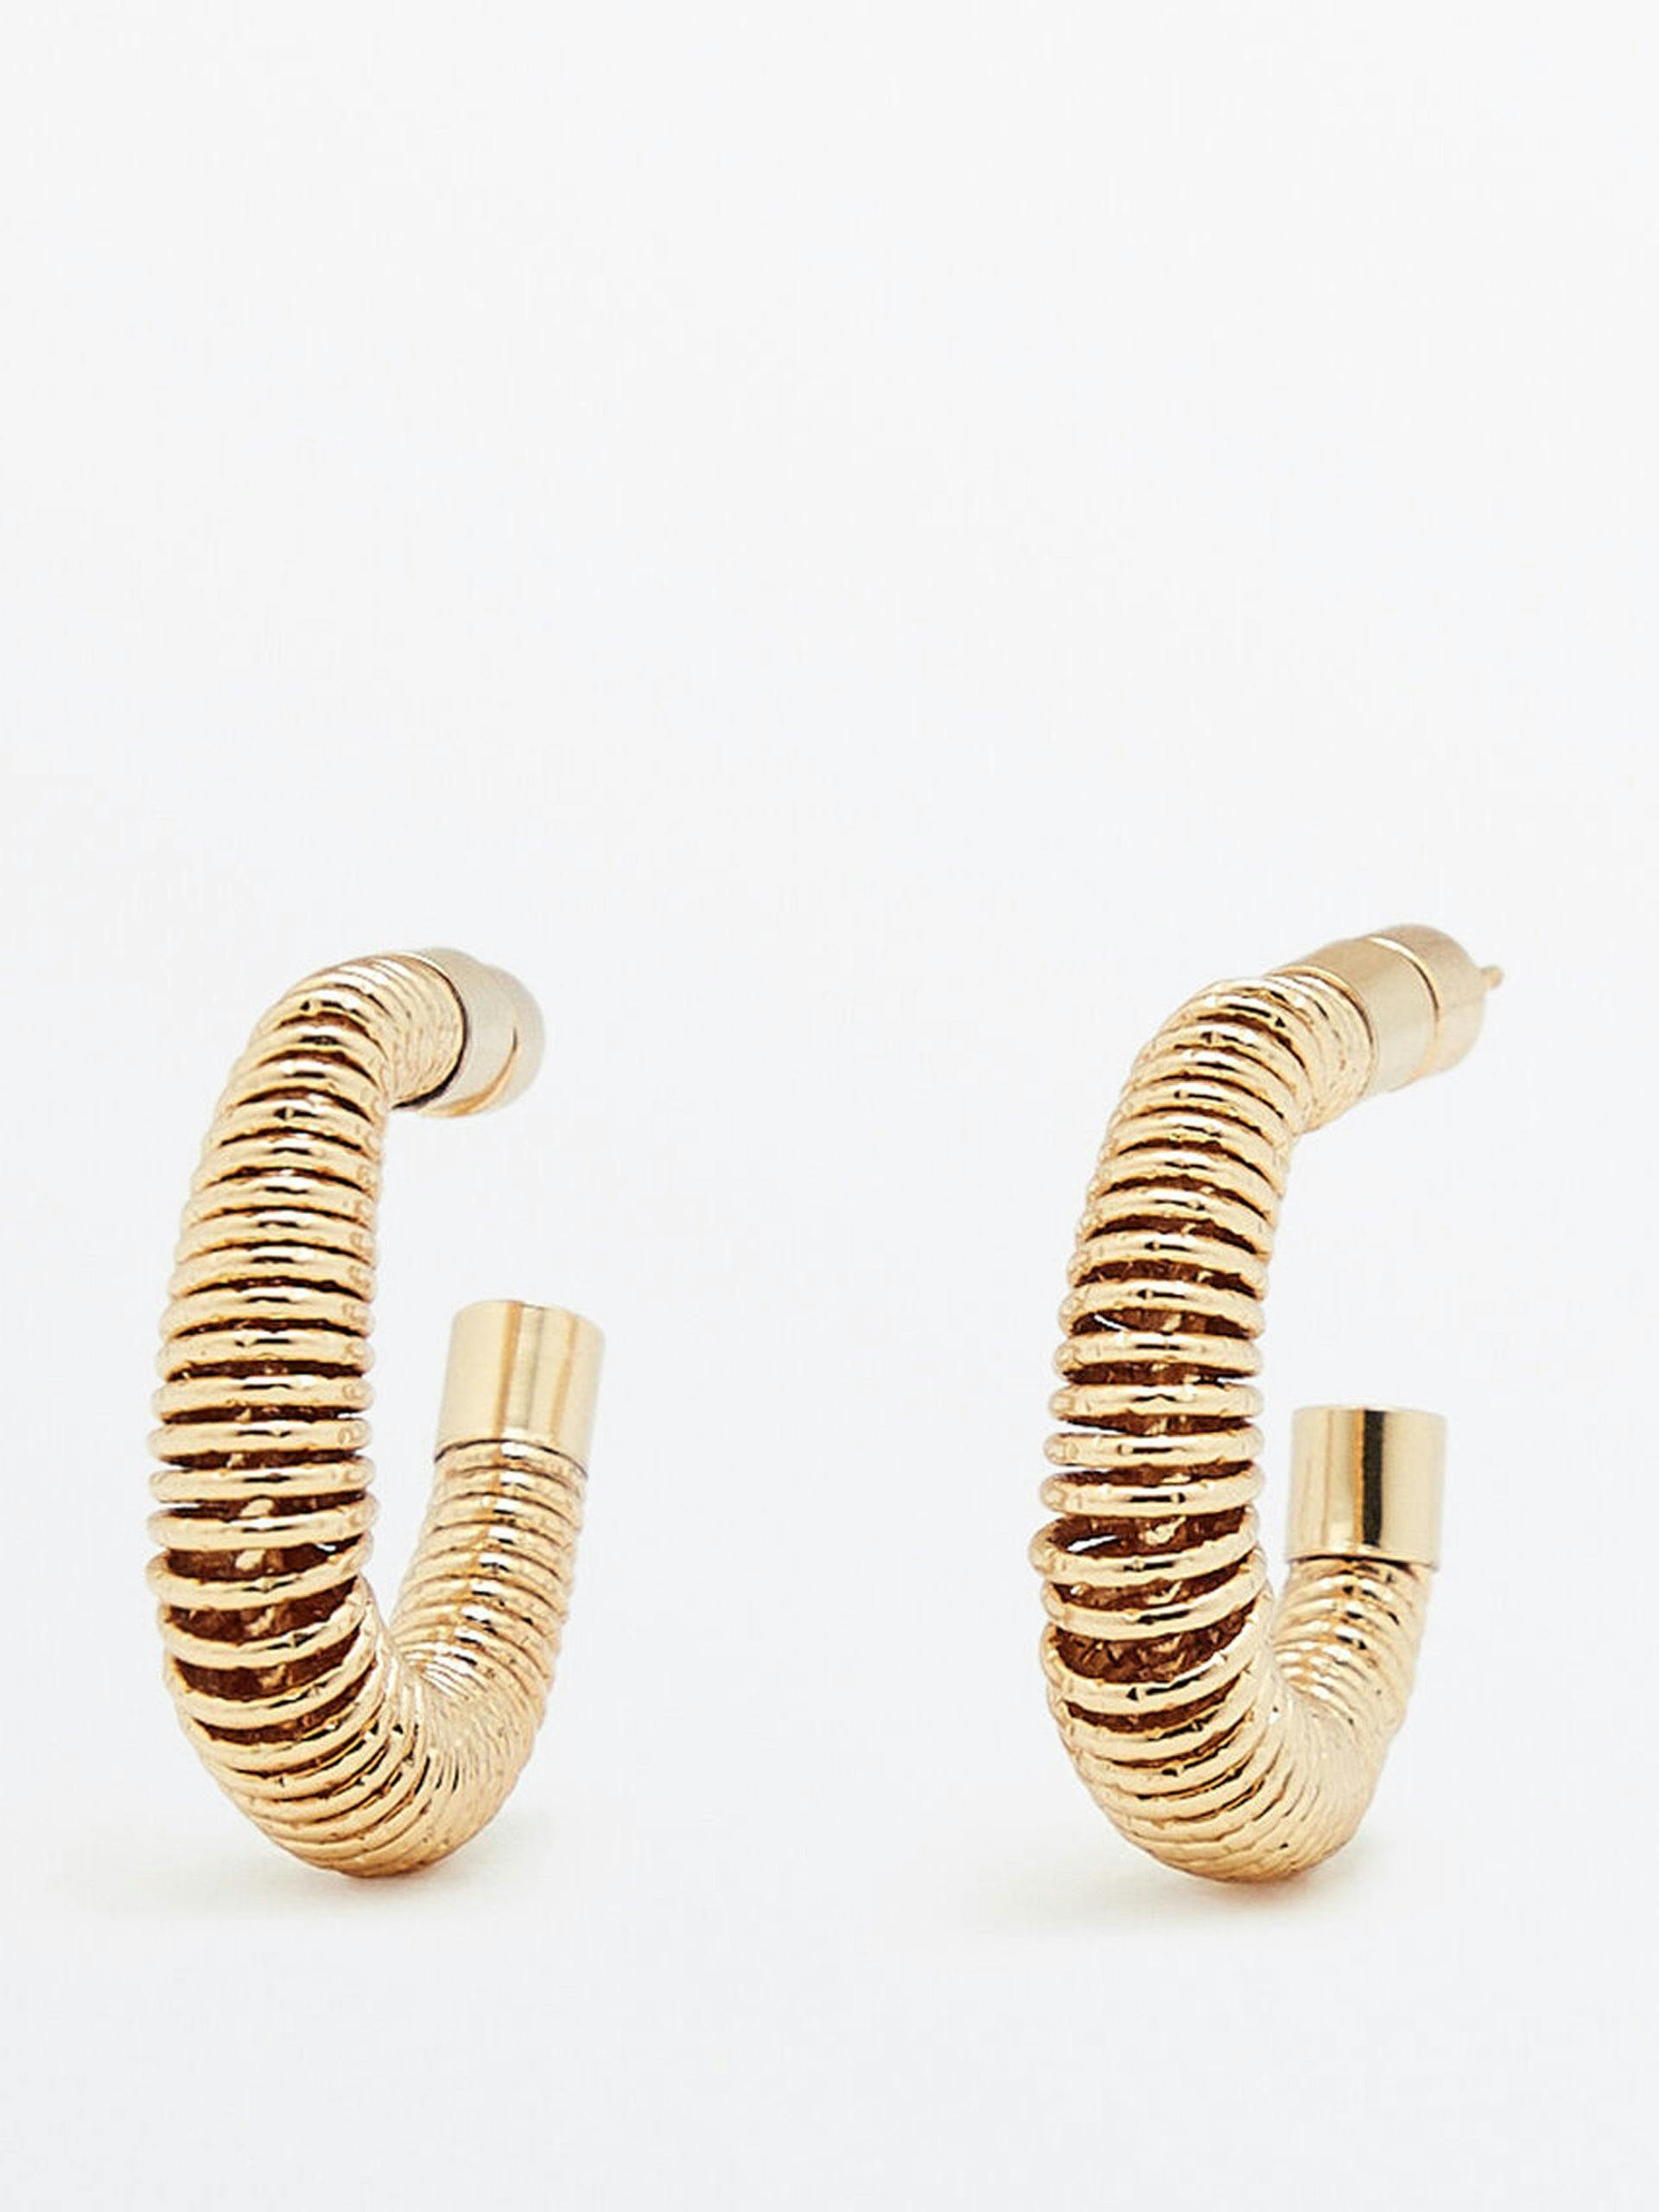 Textured gold-plated spiral hoop earrings